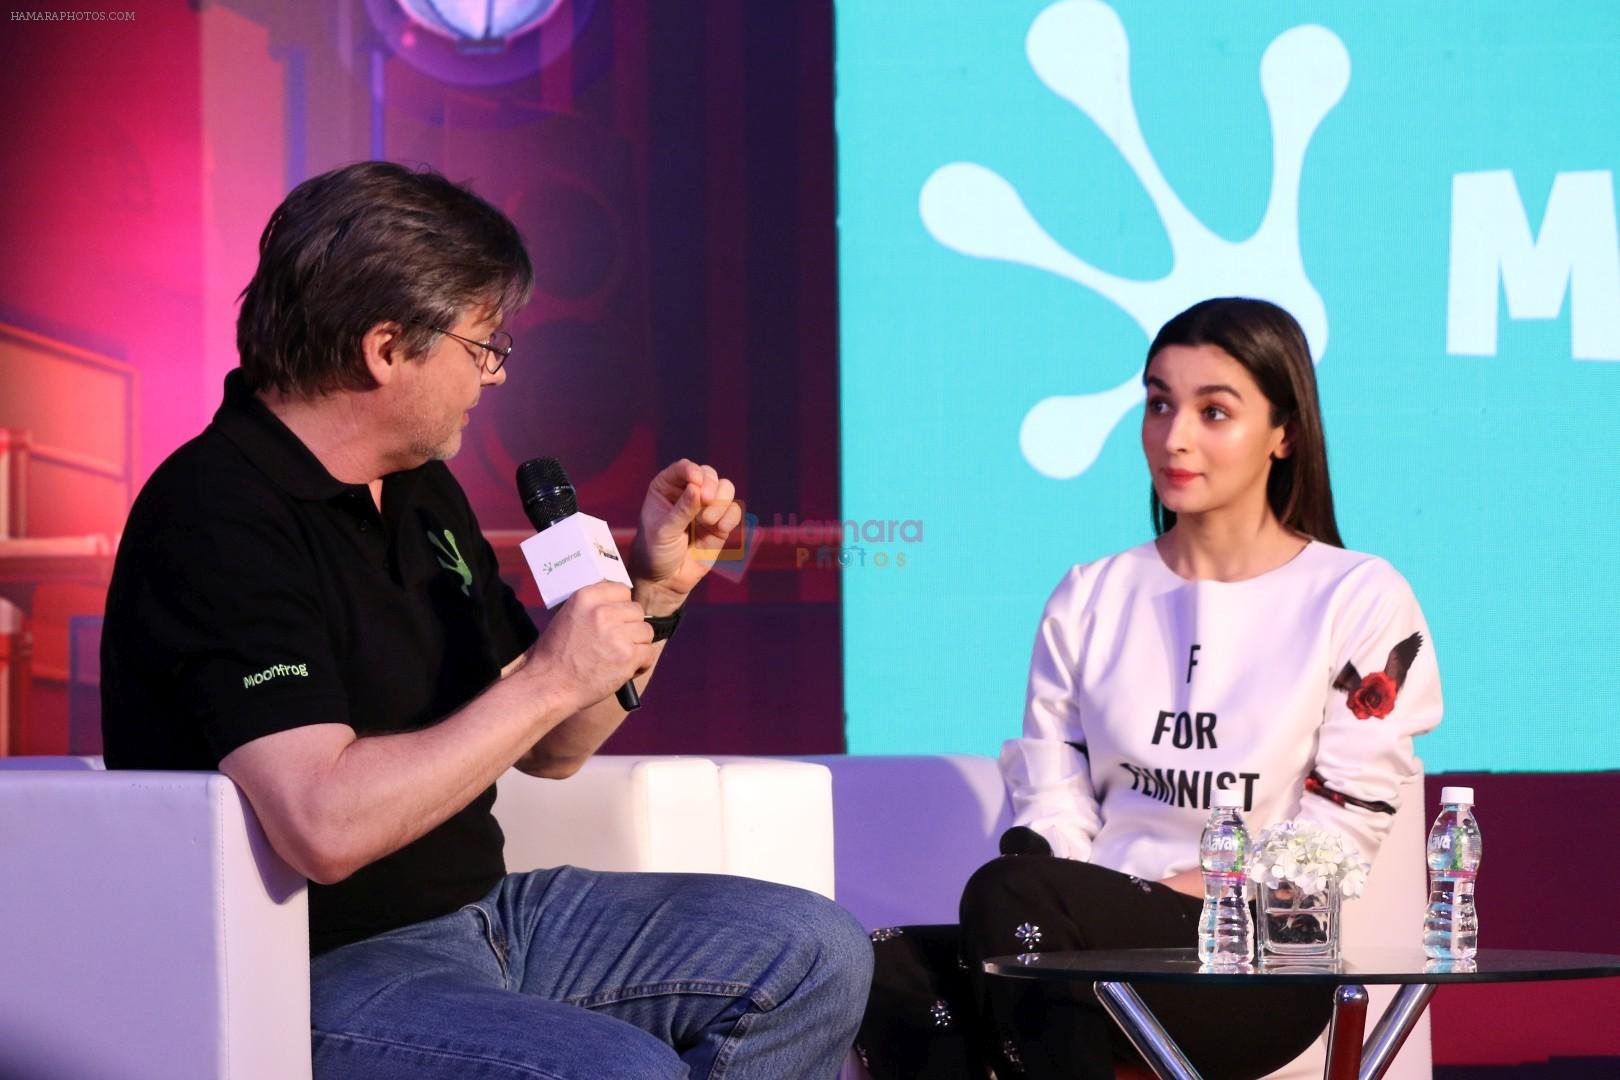 Alia Bhatt at The Launch Of Life Sim Experiential Game Alia Bhatt Star Life on 21st March 2017